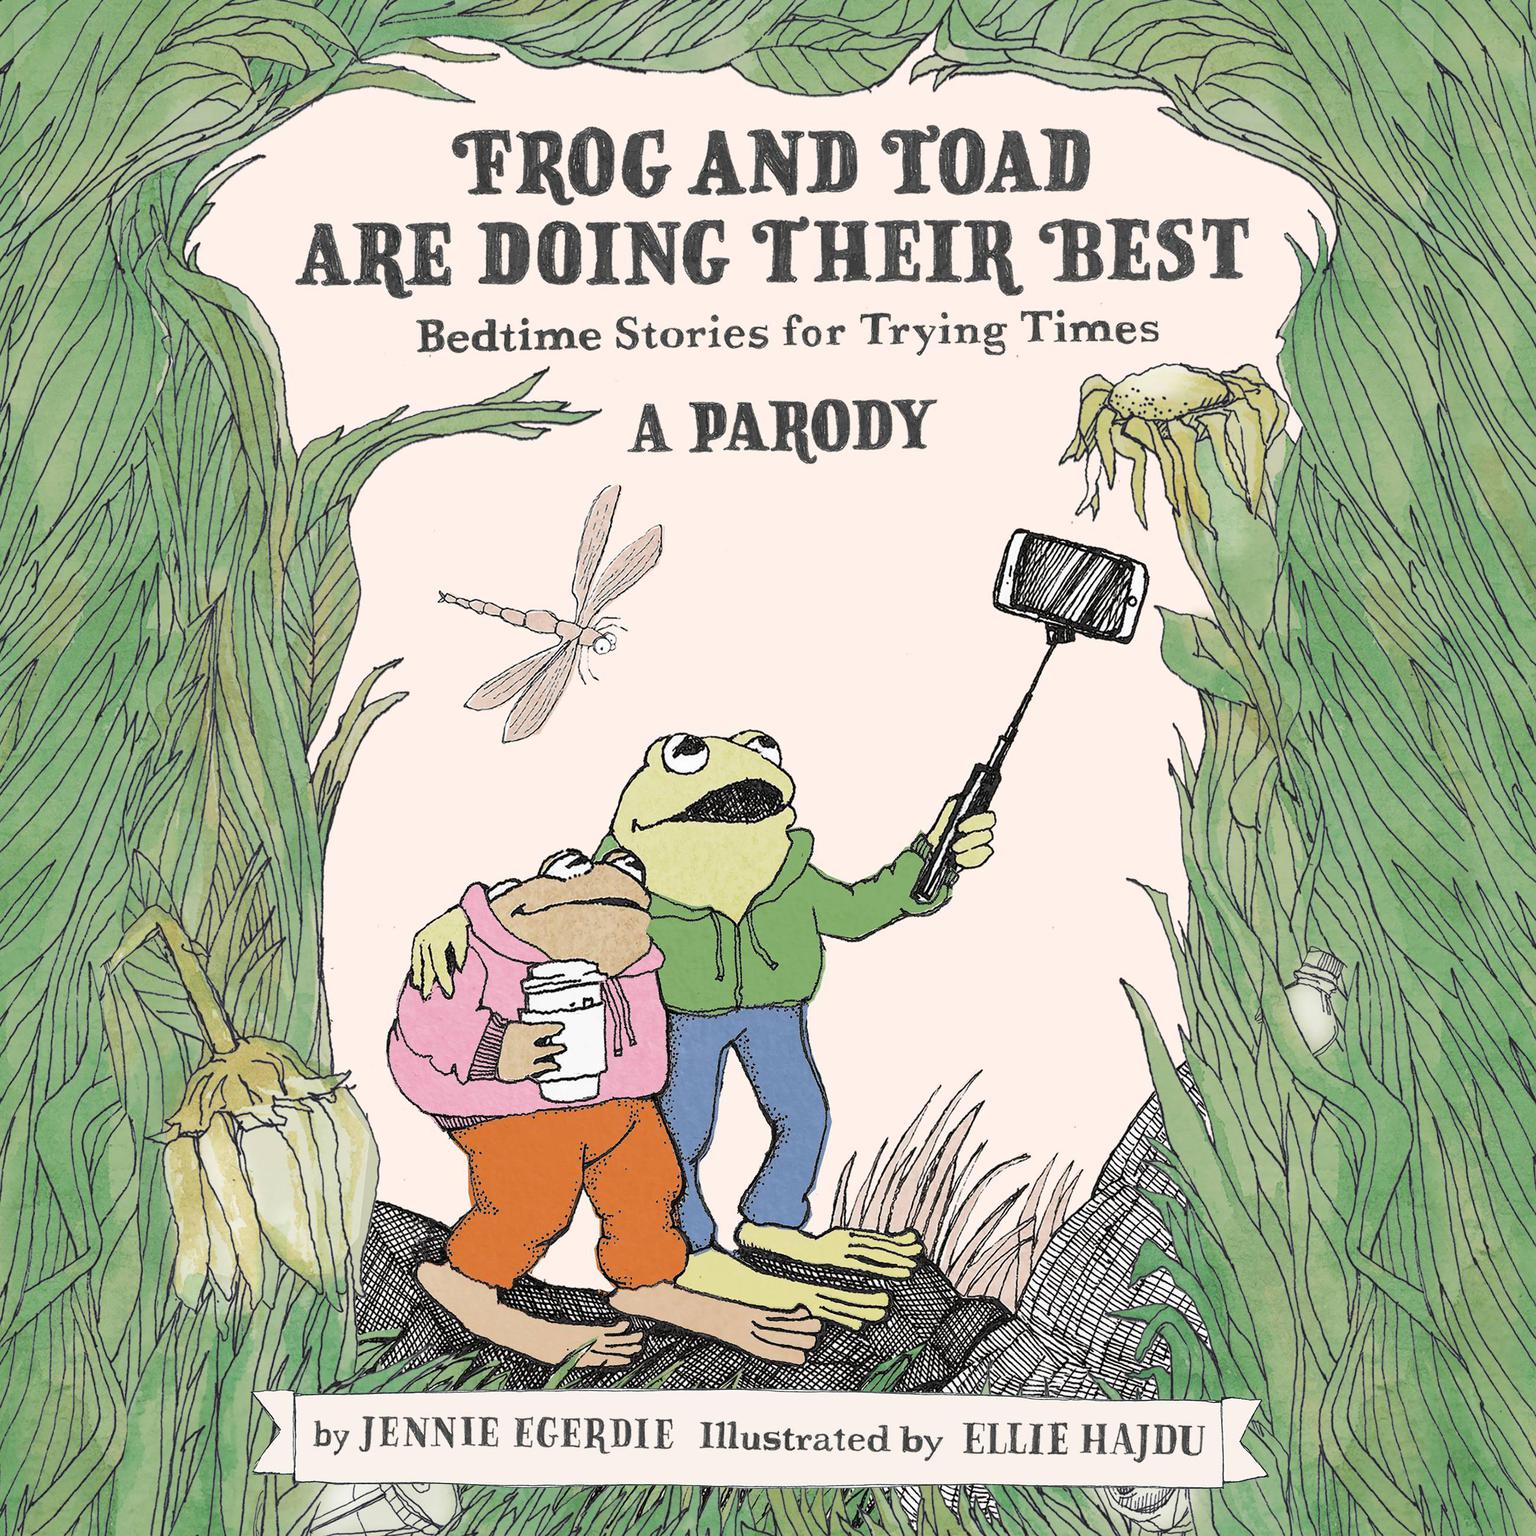 Frog and Toad are Doing Their Best [A Parody]: Bedtime Stories for Trying Times Audiobook, by Jennie Egerdie